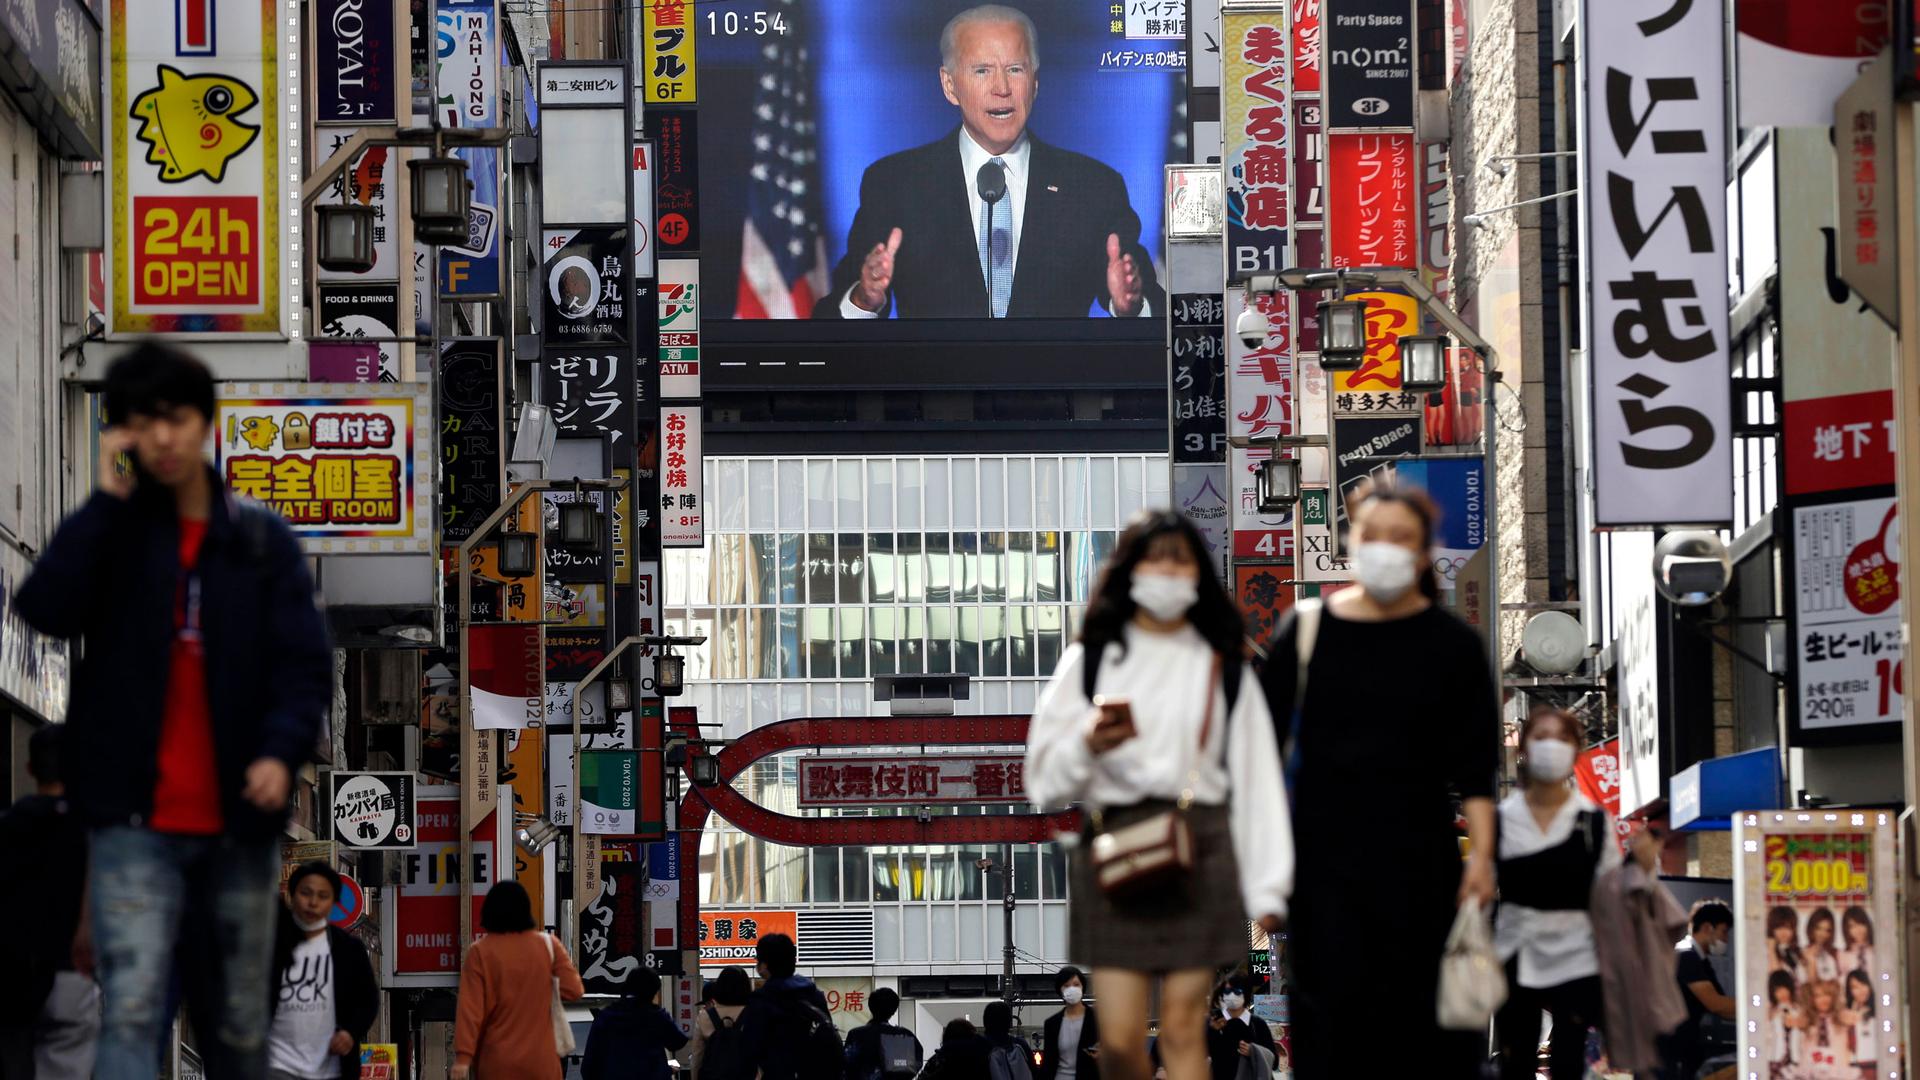 The busy streets of the Shinjuku shopping district in Tokyo adorned with signs for stores and restaurants lining either side while a live broadcast shown on a large public television monitor of President-elect Joe Biden.